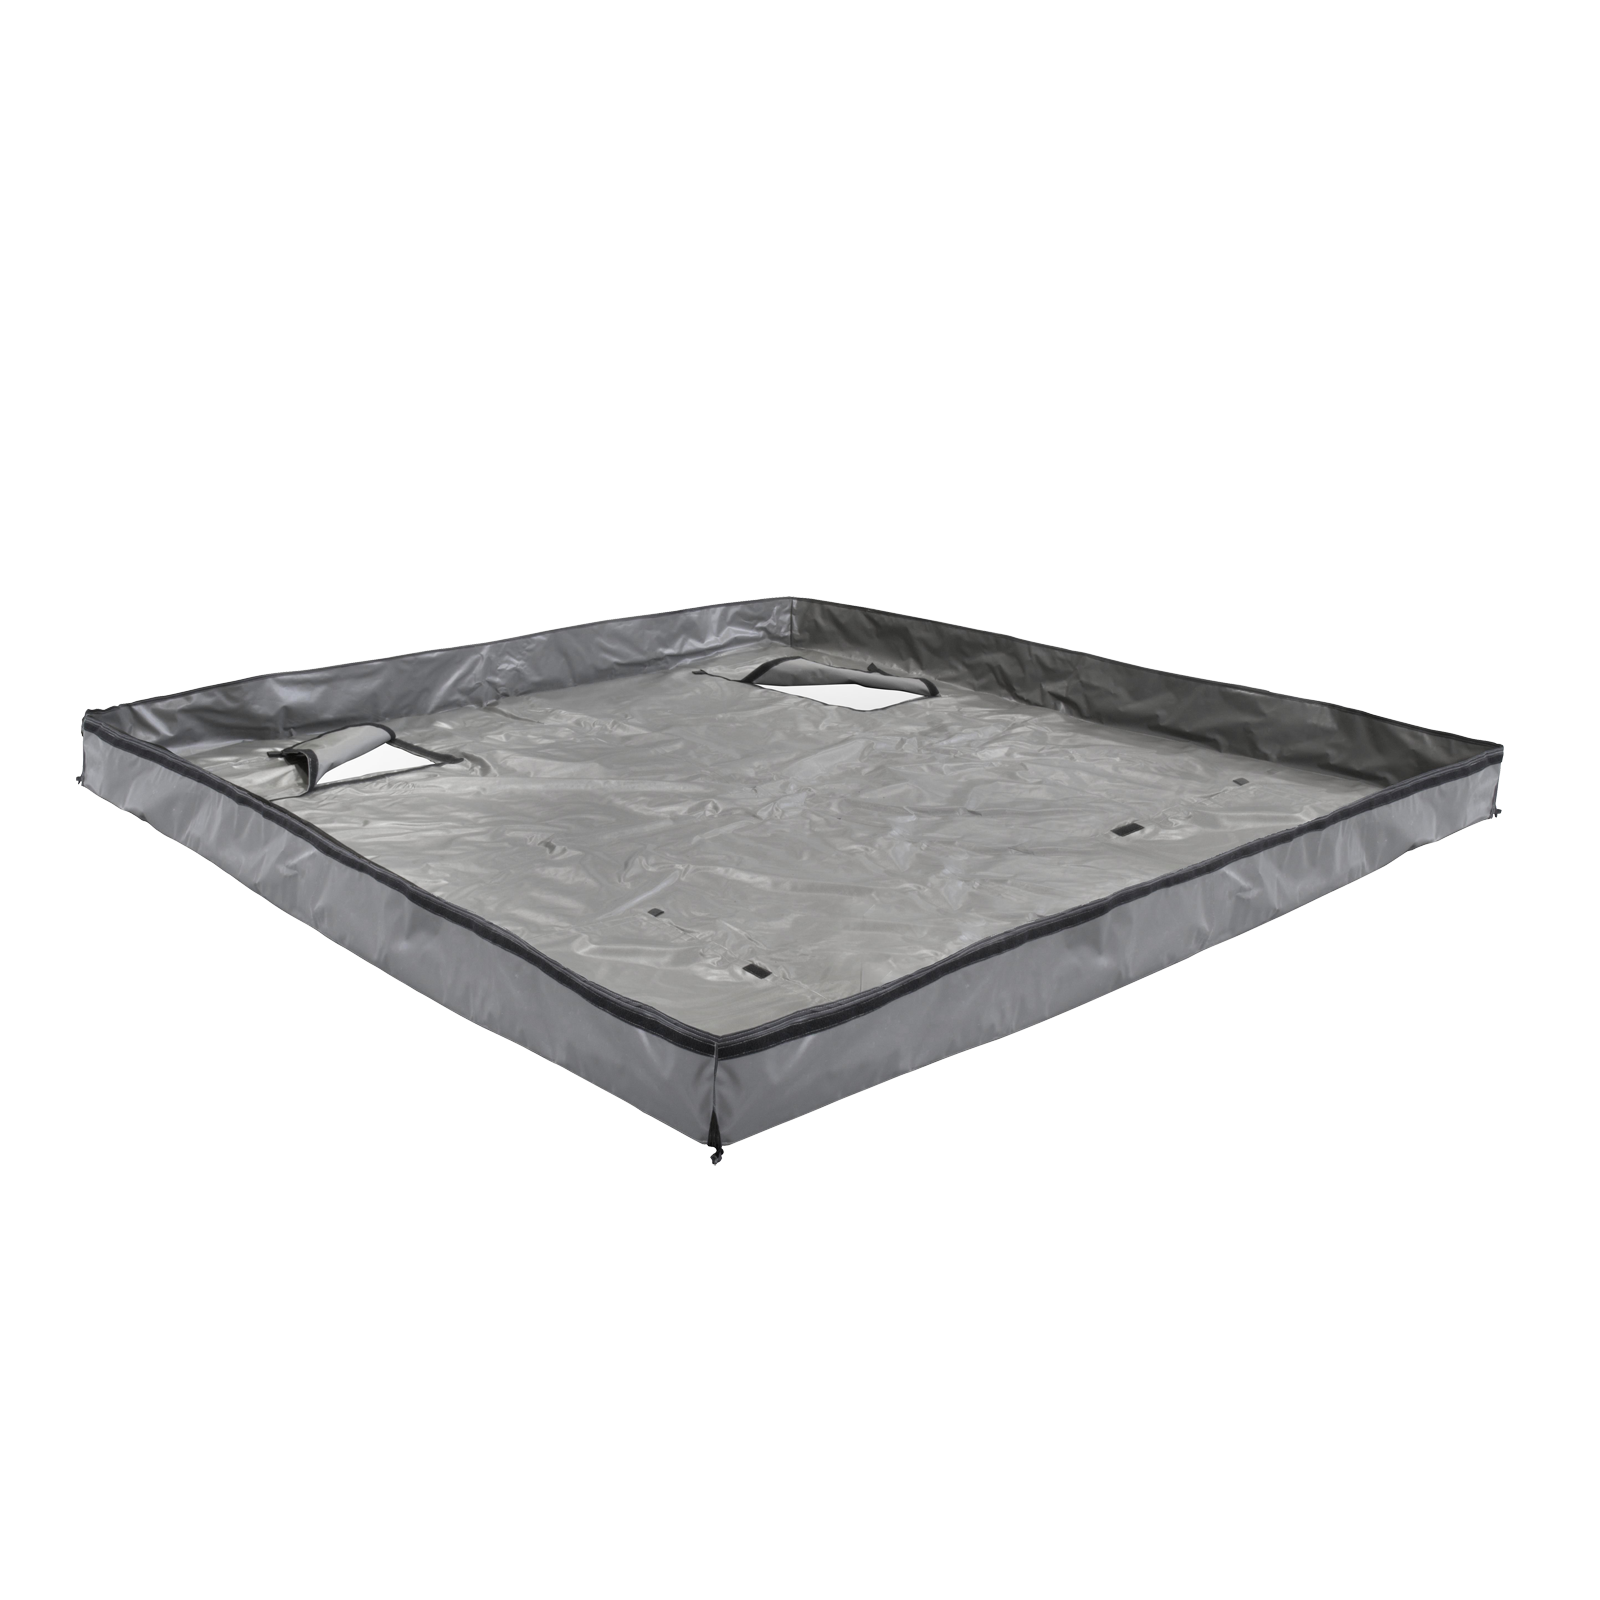 Clam Removable Floor for Ice Thermal Hub 4 Sided Ice Fishing Tents